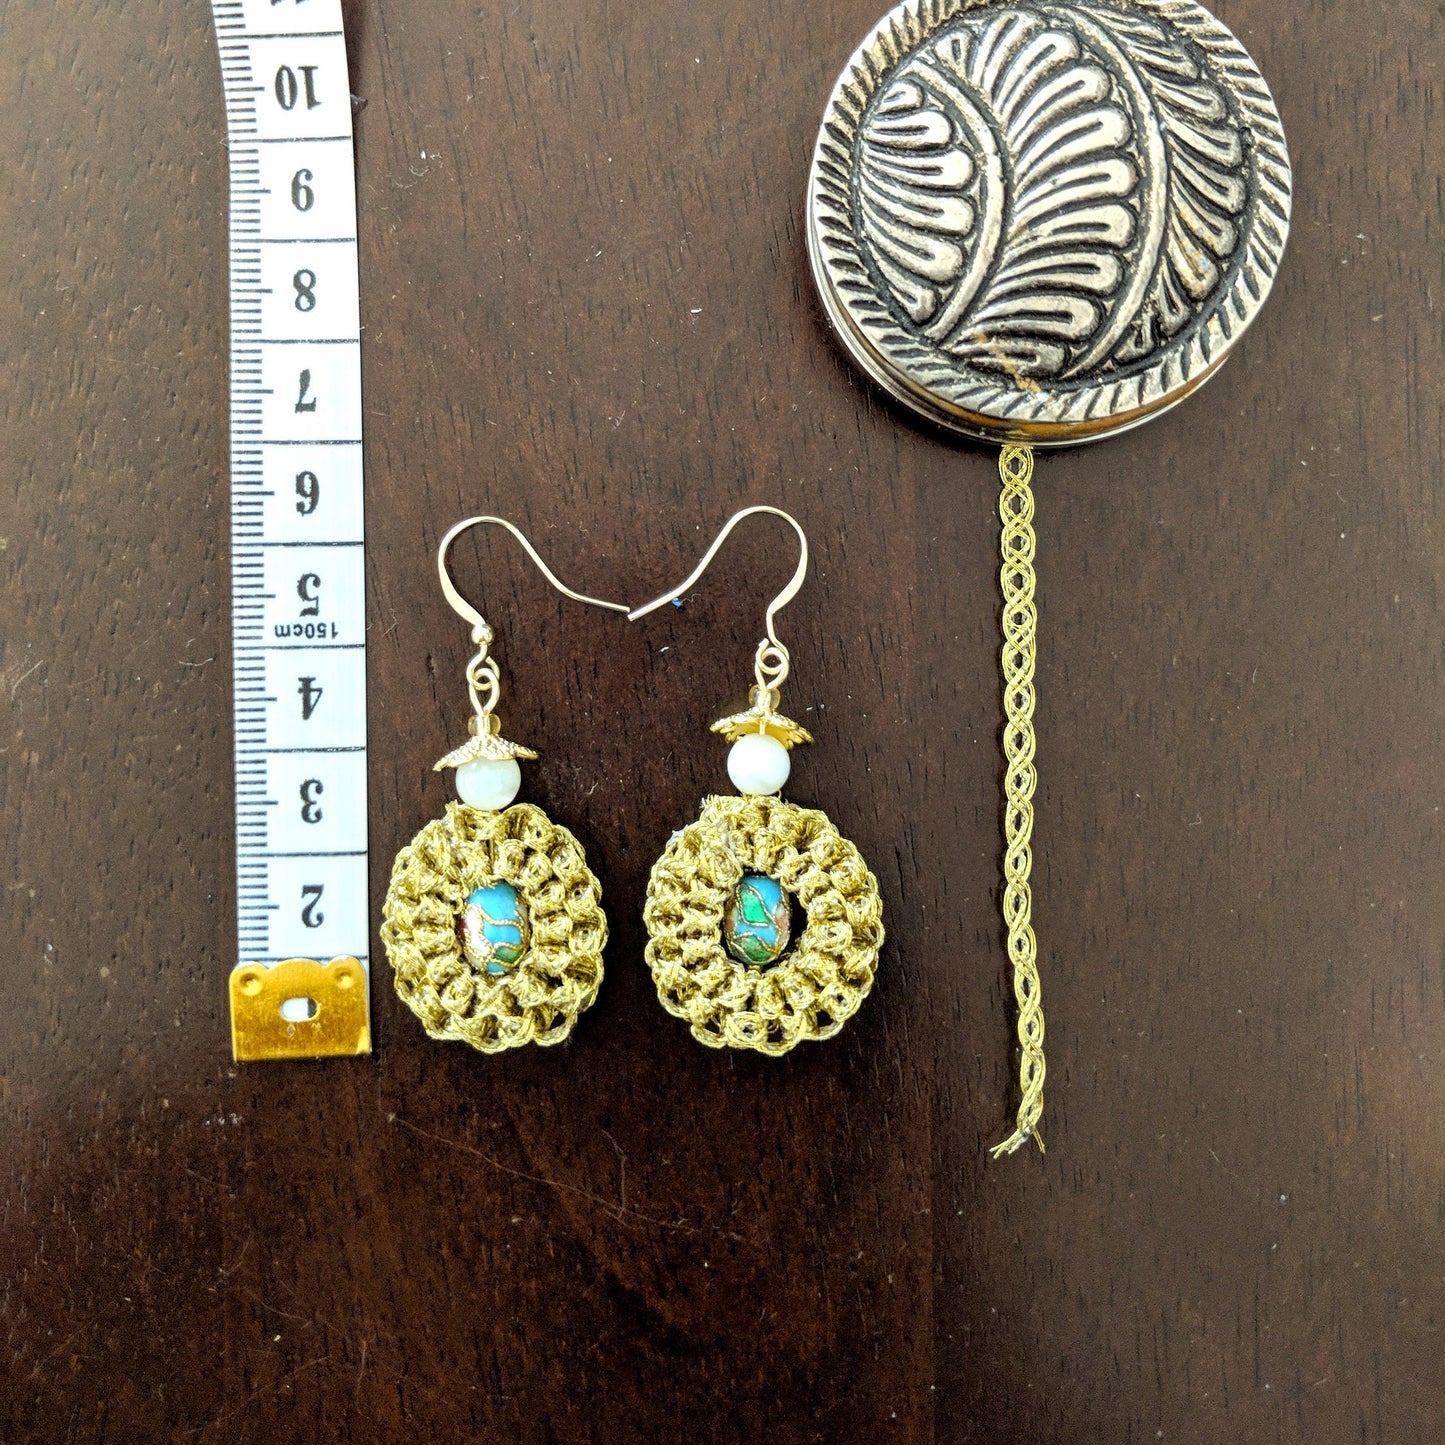 Chinese Vintage Inspired Golden Lace Blue Cloisonne Earrings